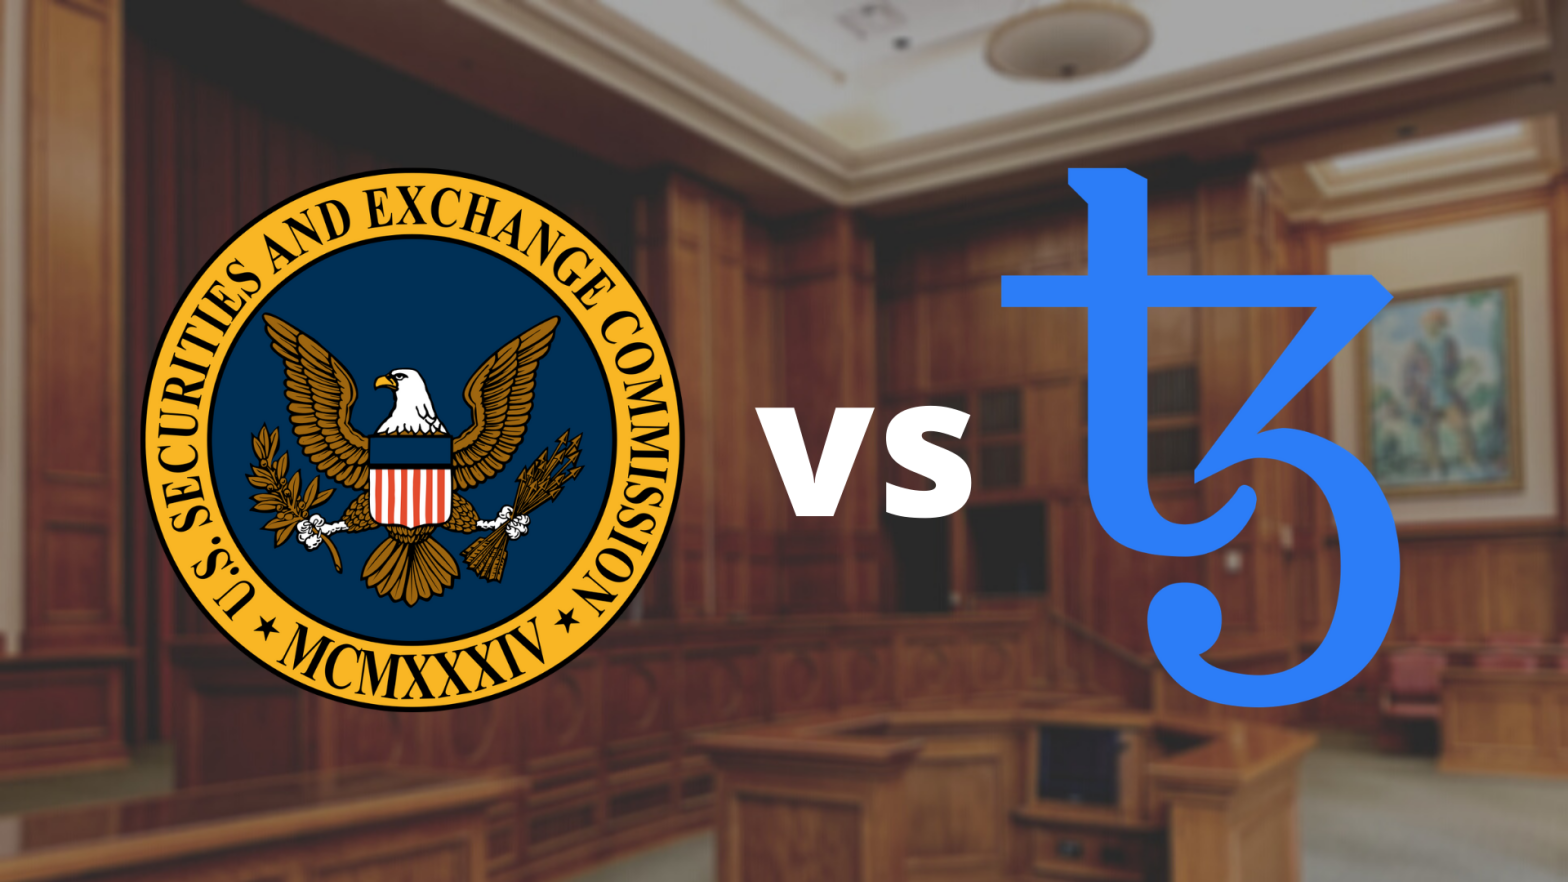 Tezos can settle ICO related lawsuit for $25 million in cash